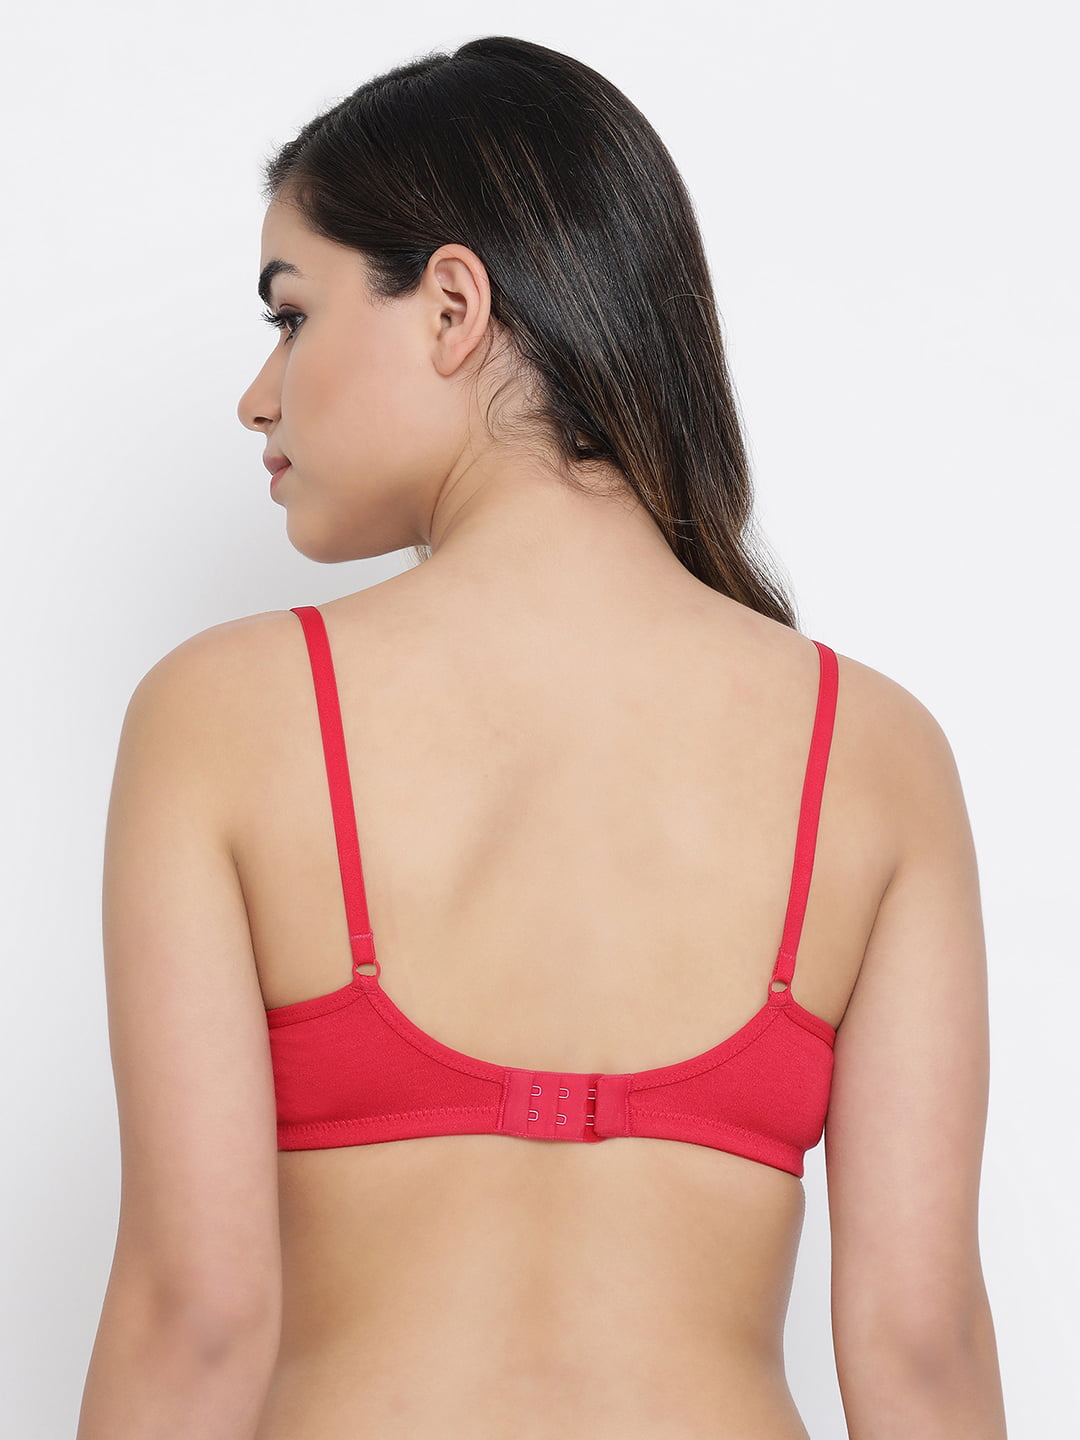 Buy online Pink Cotton Bra from lingerie for Women by Clovia for